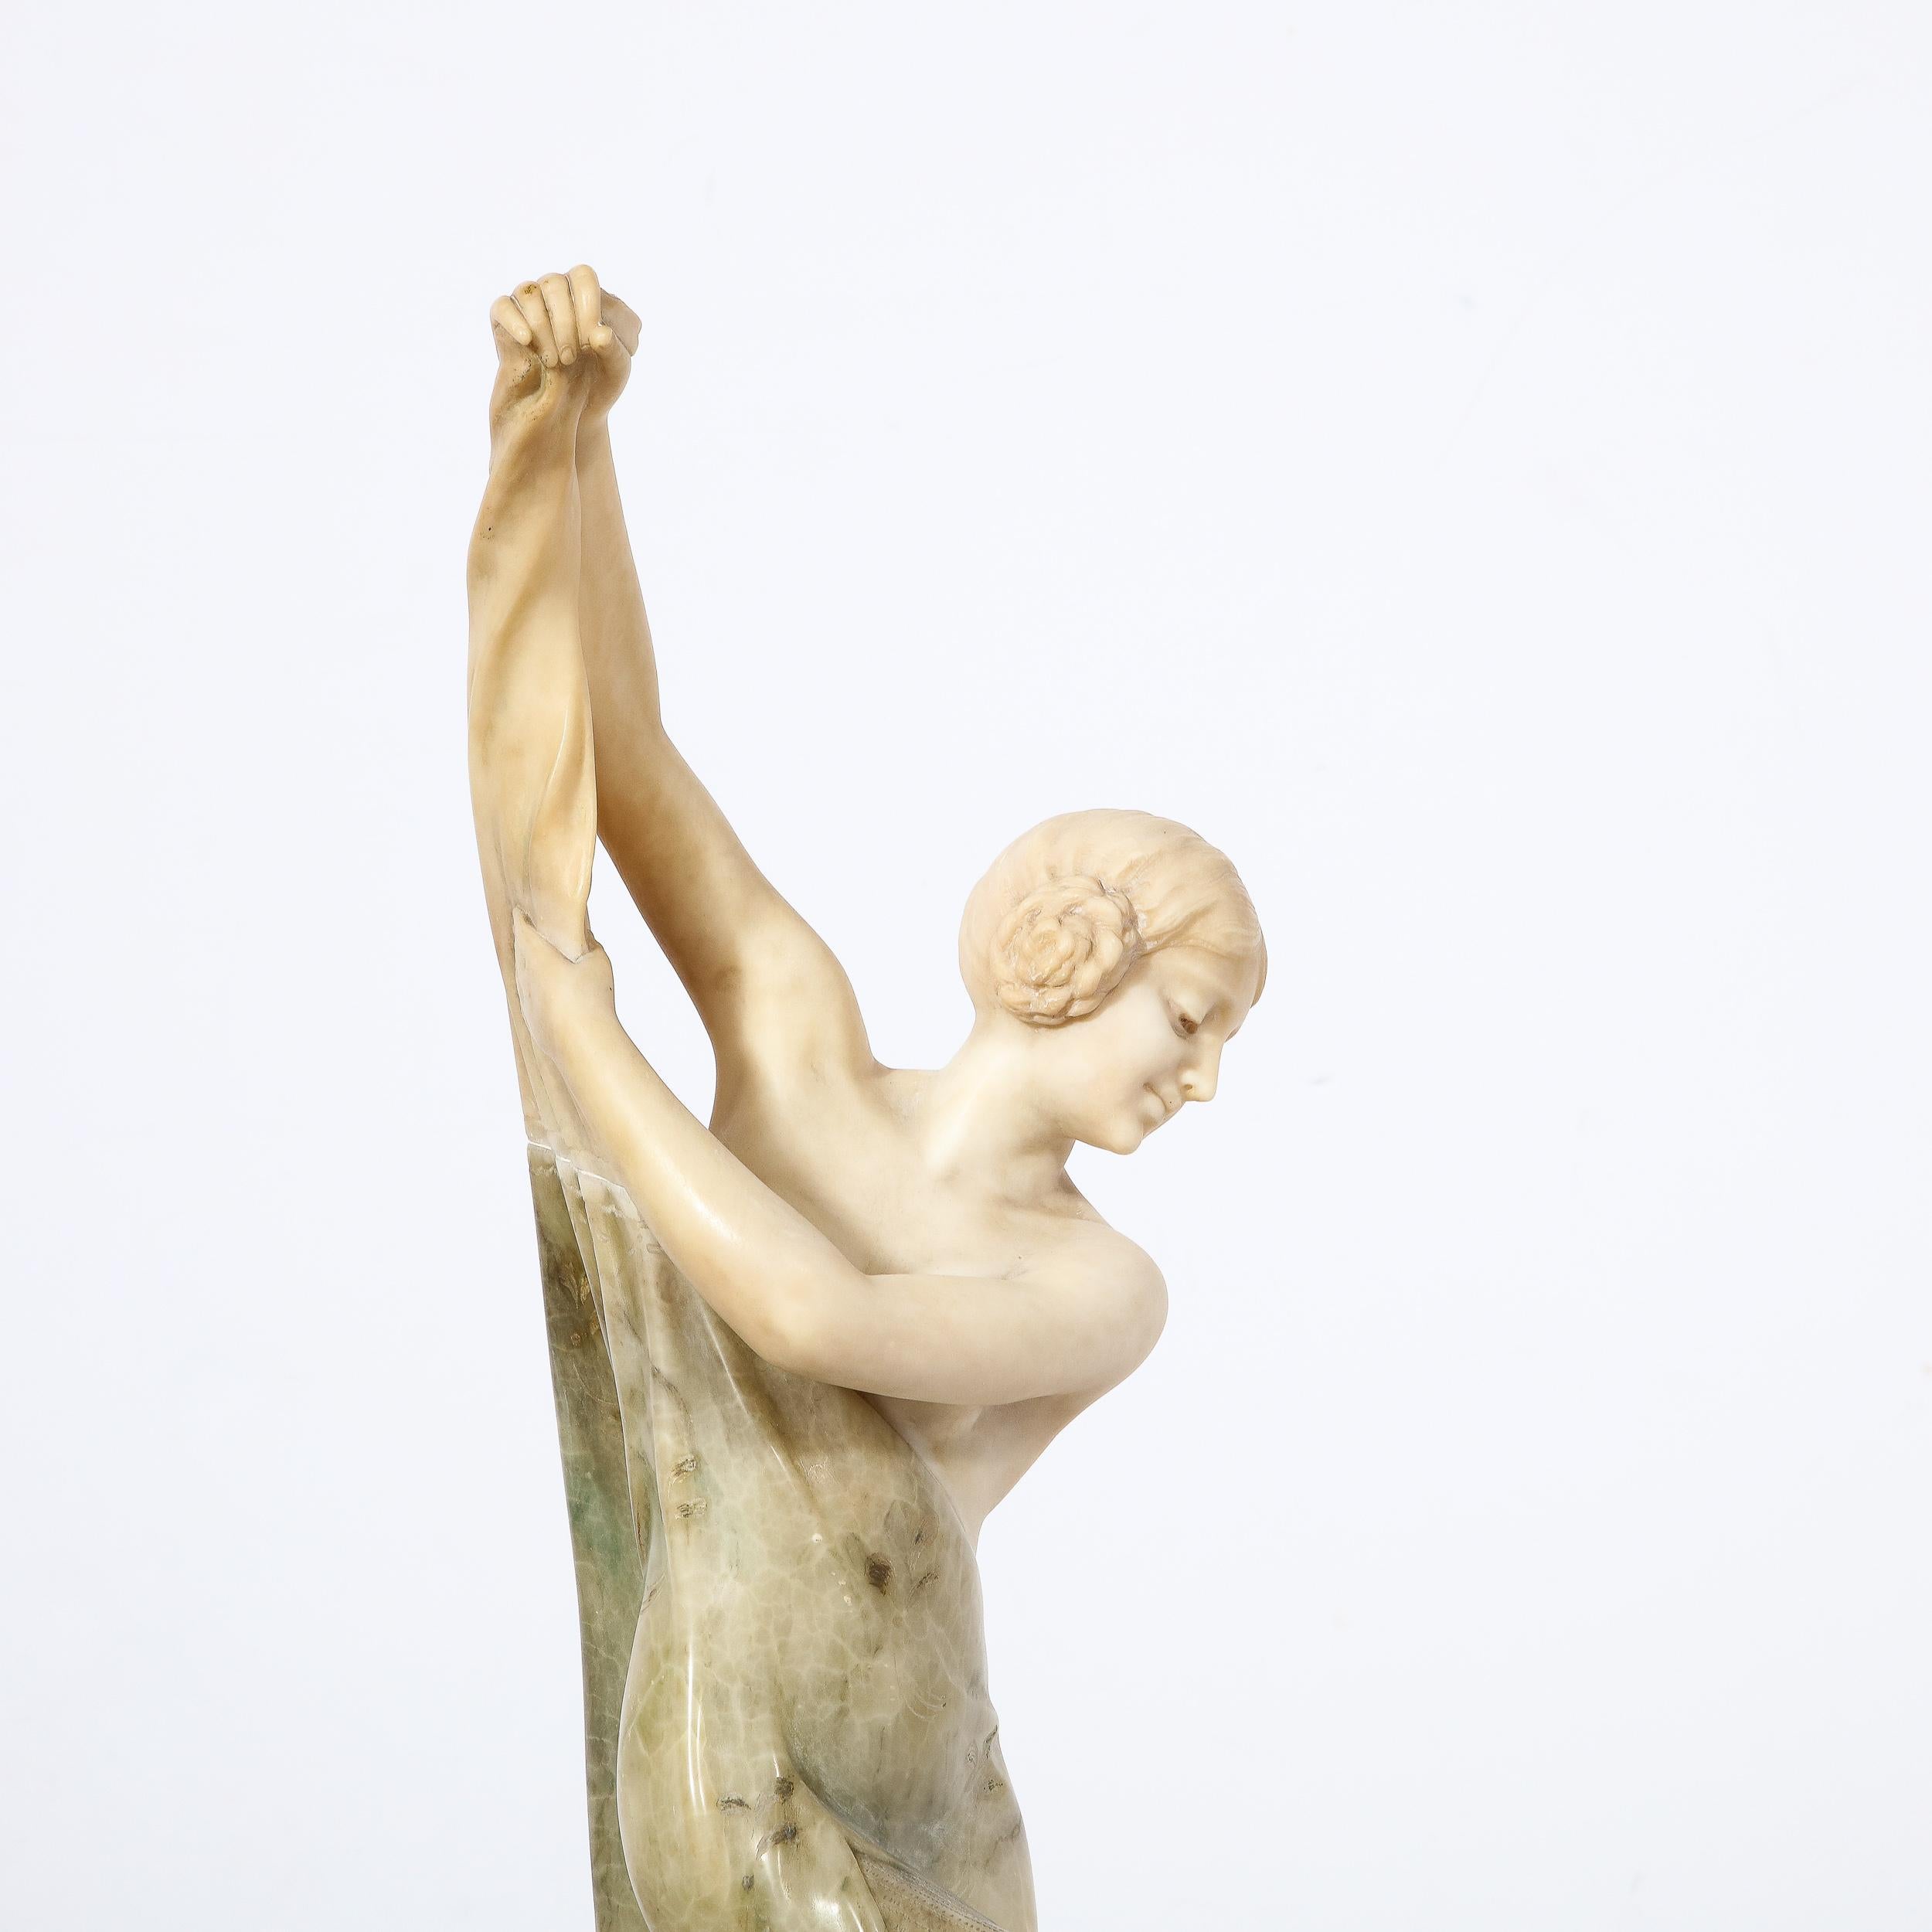 This playful and materially stunning Art Deco Draped Flapper Sculpture with Illuminated Flame Base in Olive, White, and Pink Alabaster is by the artist Prof Libero Gremigni and originates from Italy, Circa 1930. Features a dancing female figure in